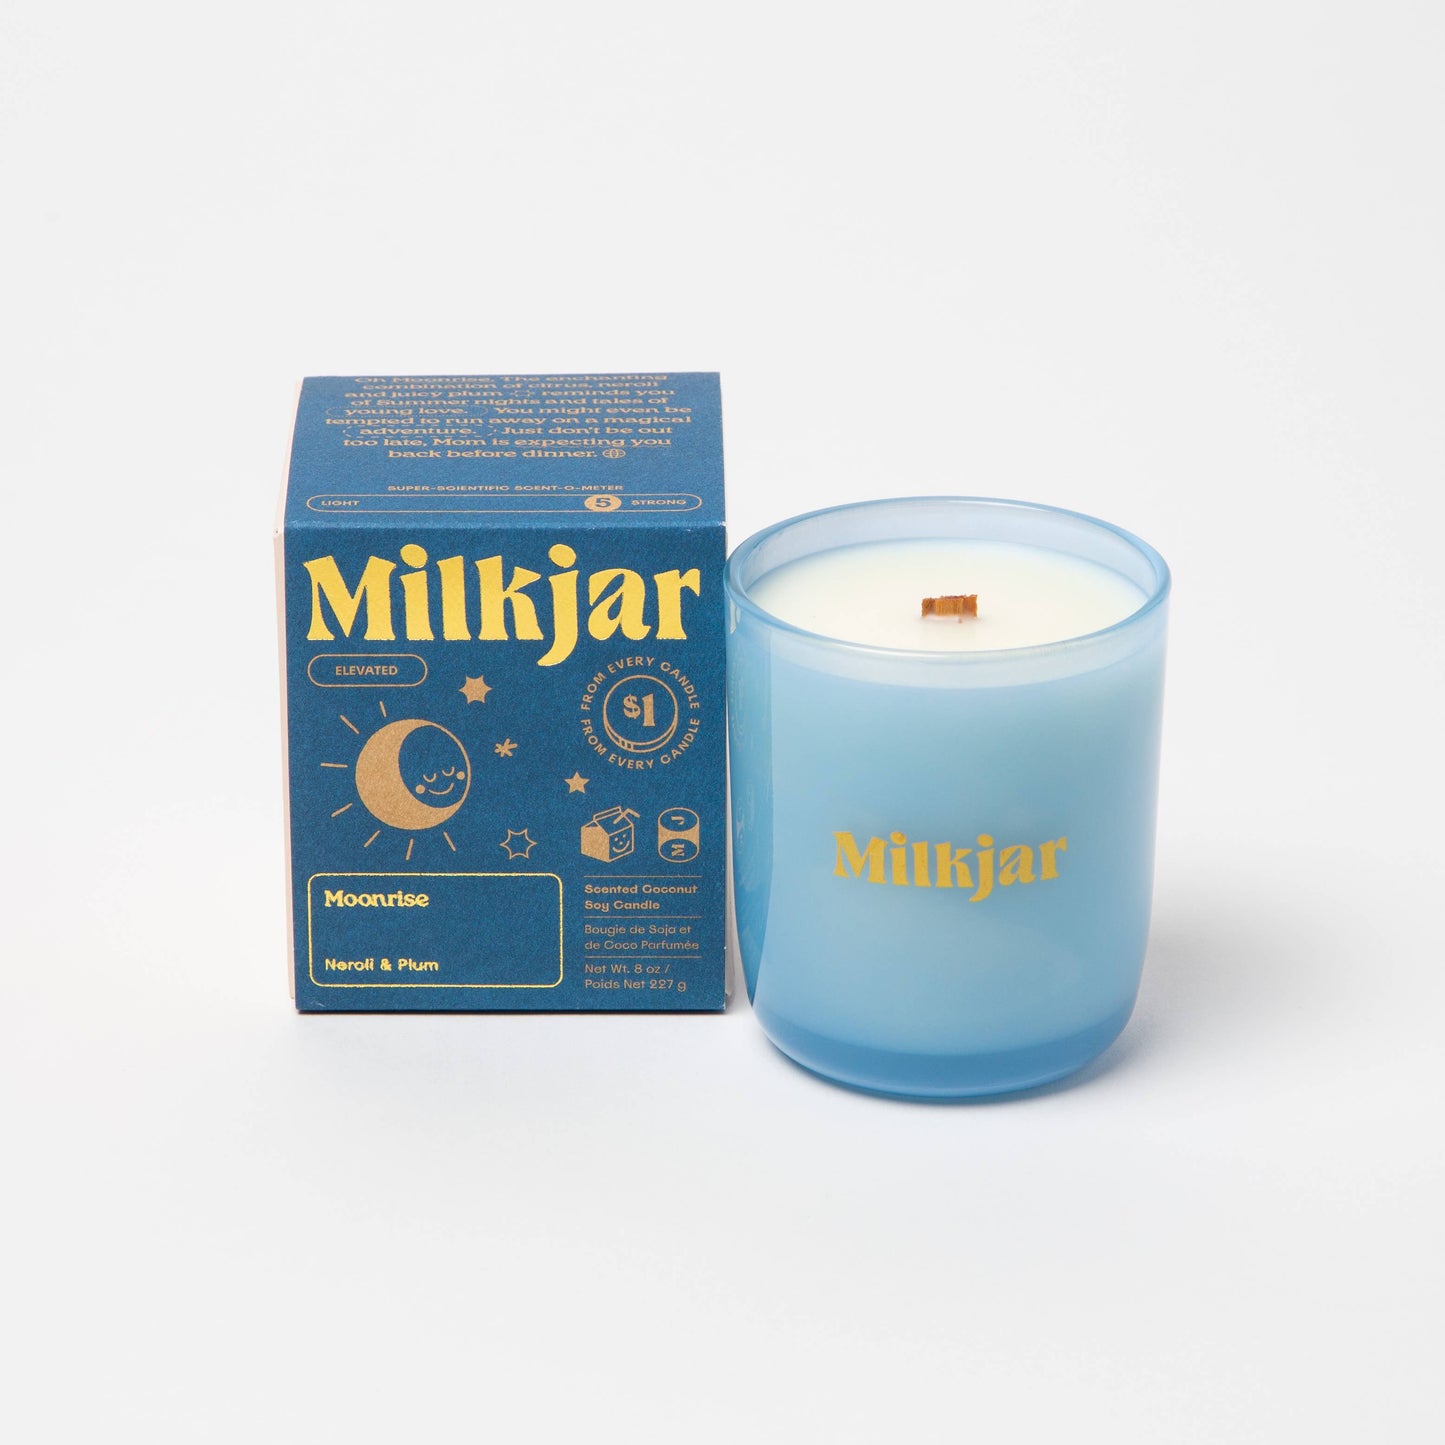 Milk Jar Candle Co. Moonrise Scented Candle - Osmology Scented Candles & Home Fragrance